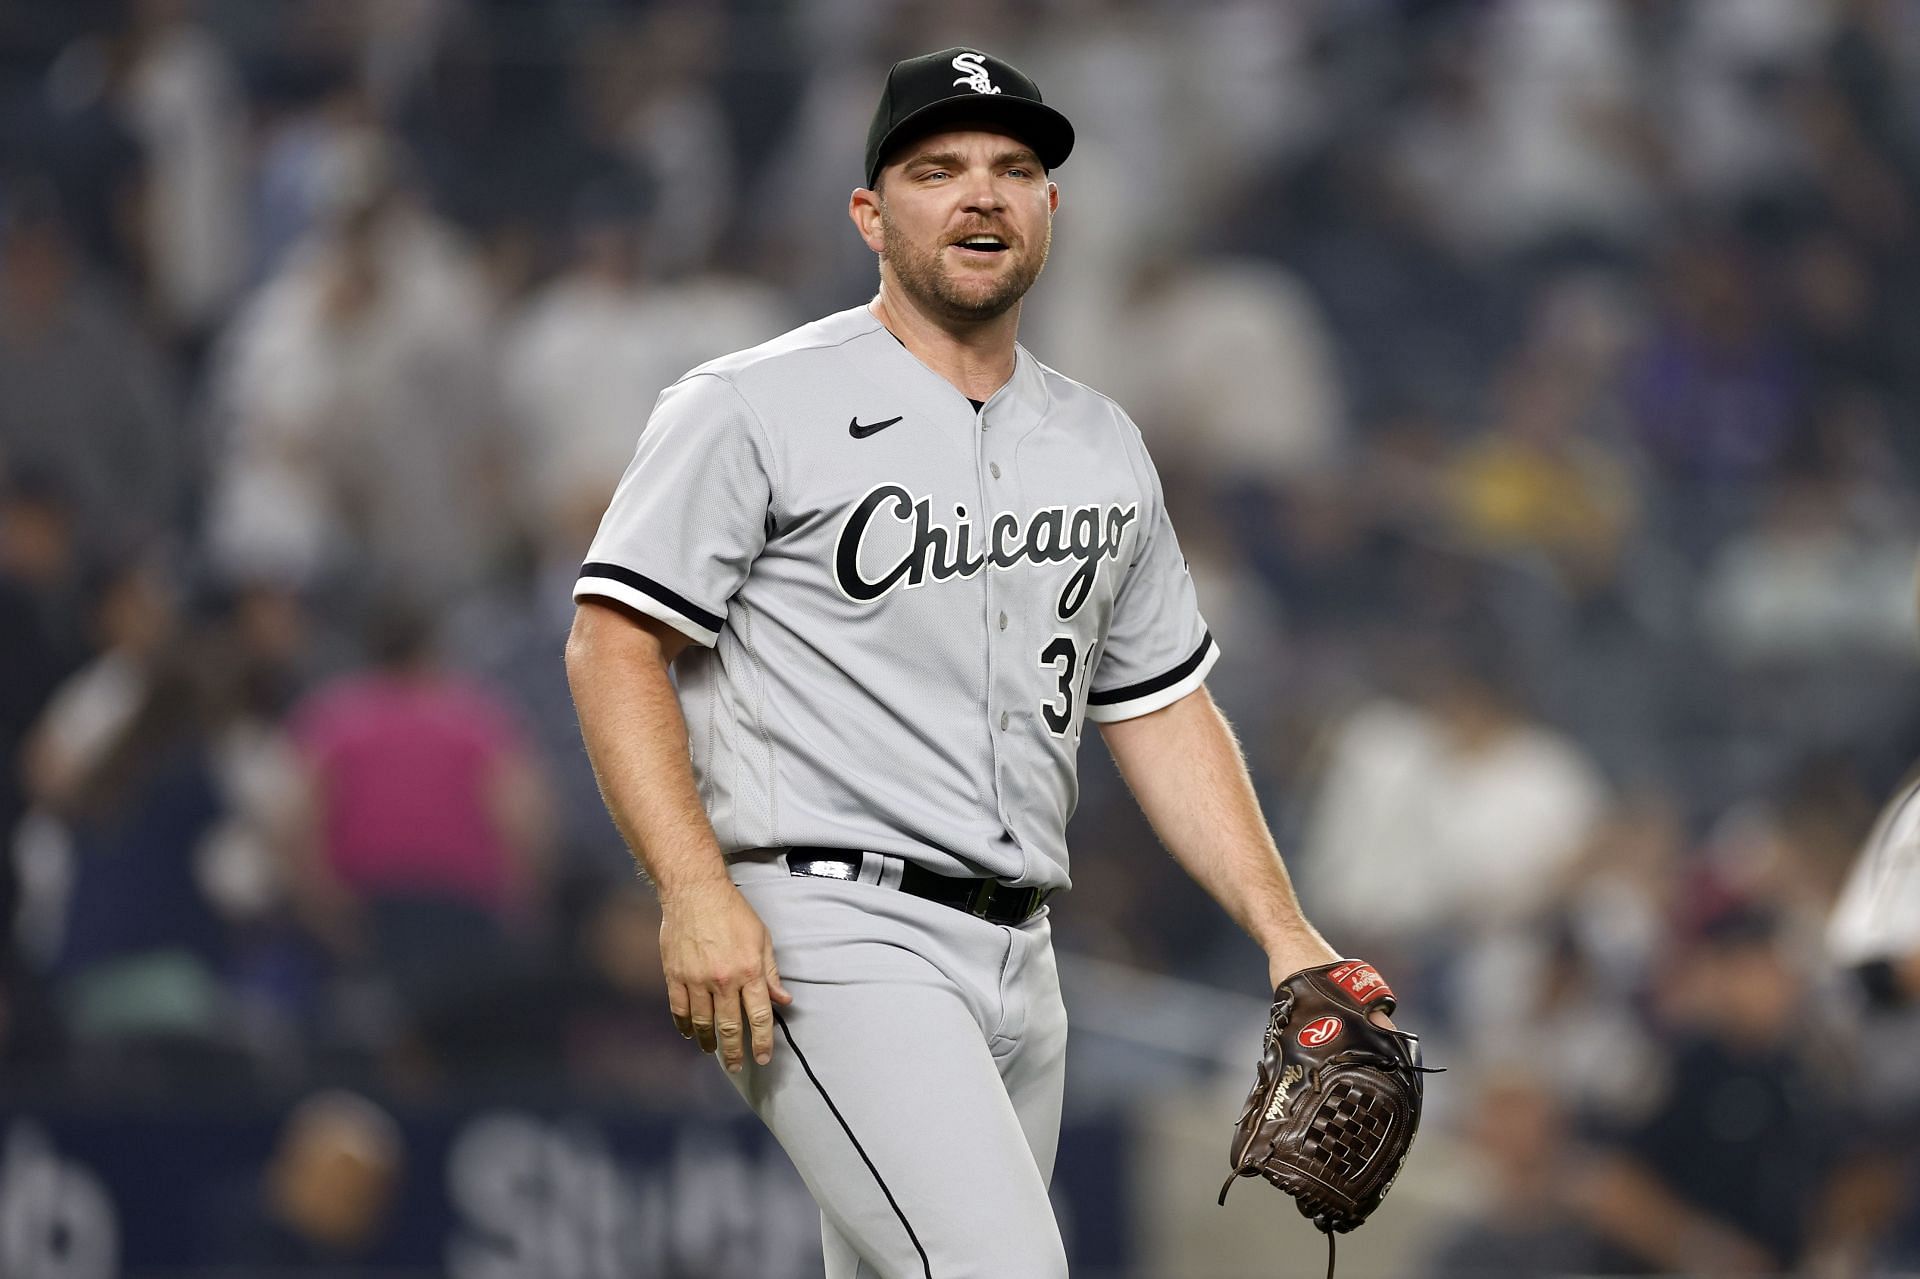 The Chicago White Sox have labored this year